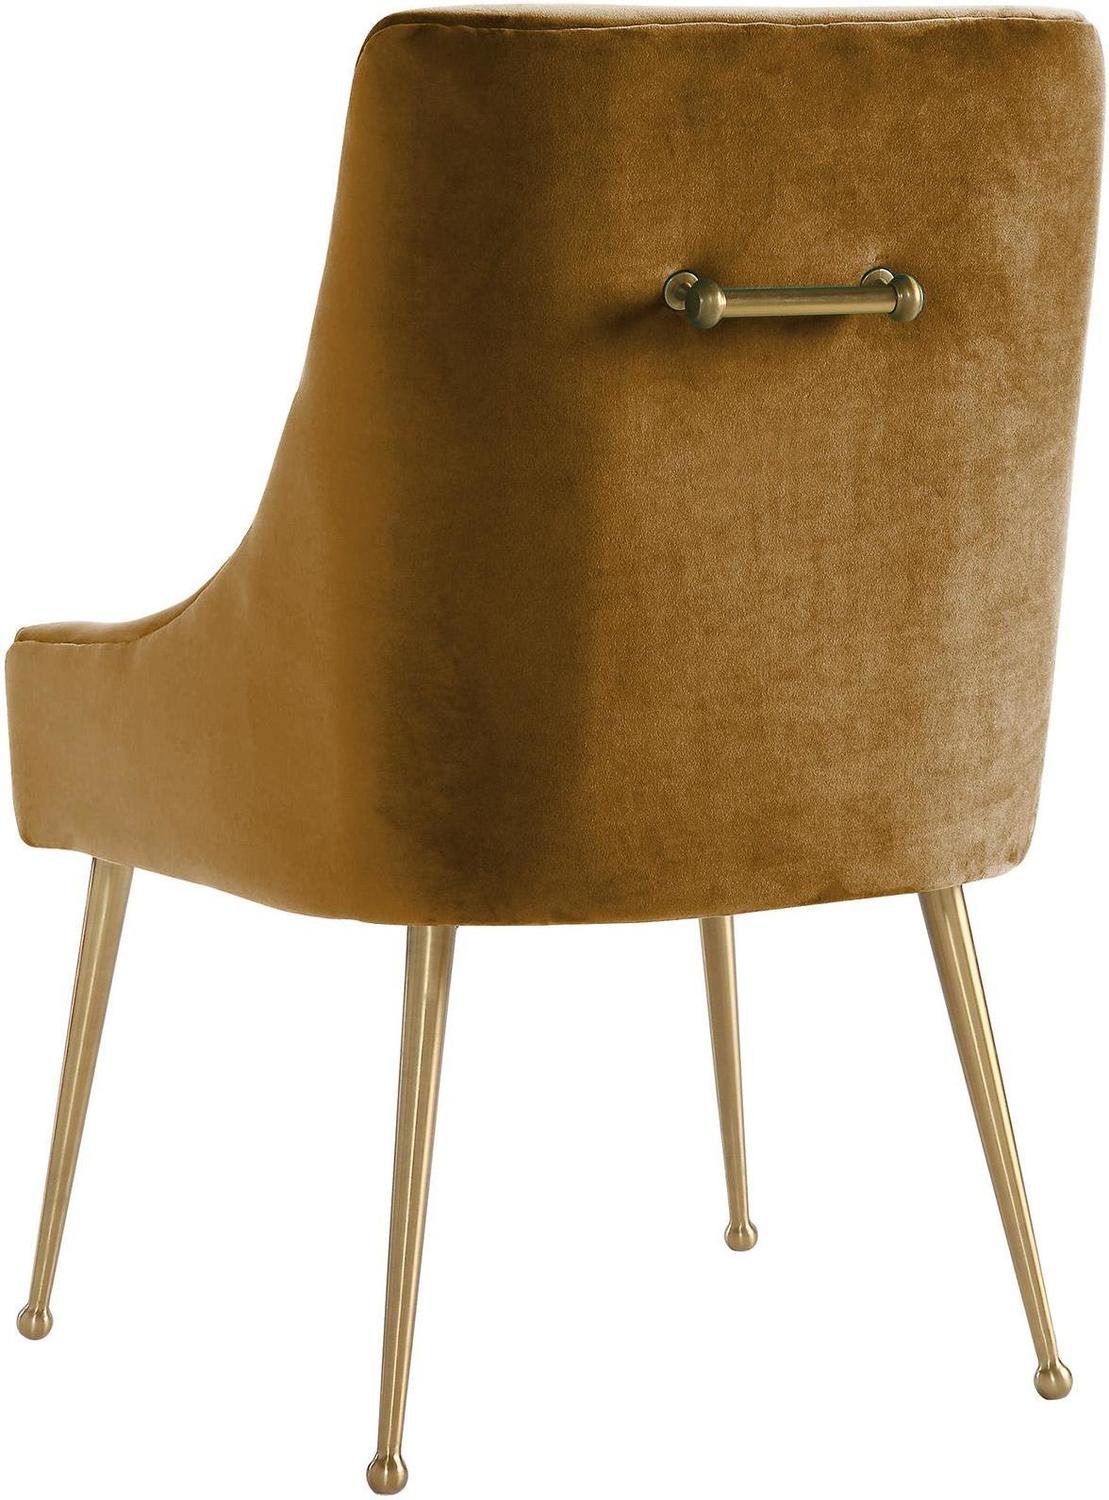 armchair chair Tov Furniture Dining Chairs Chairs Cognac